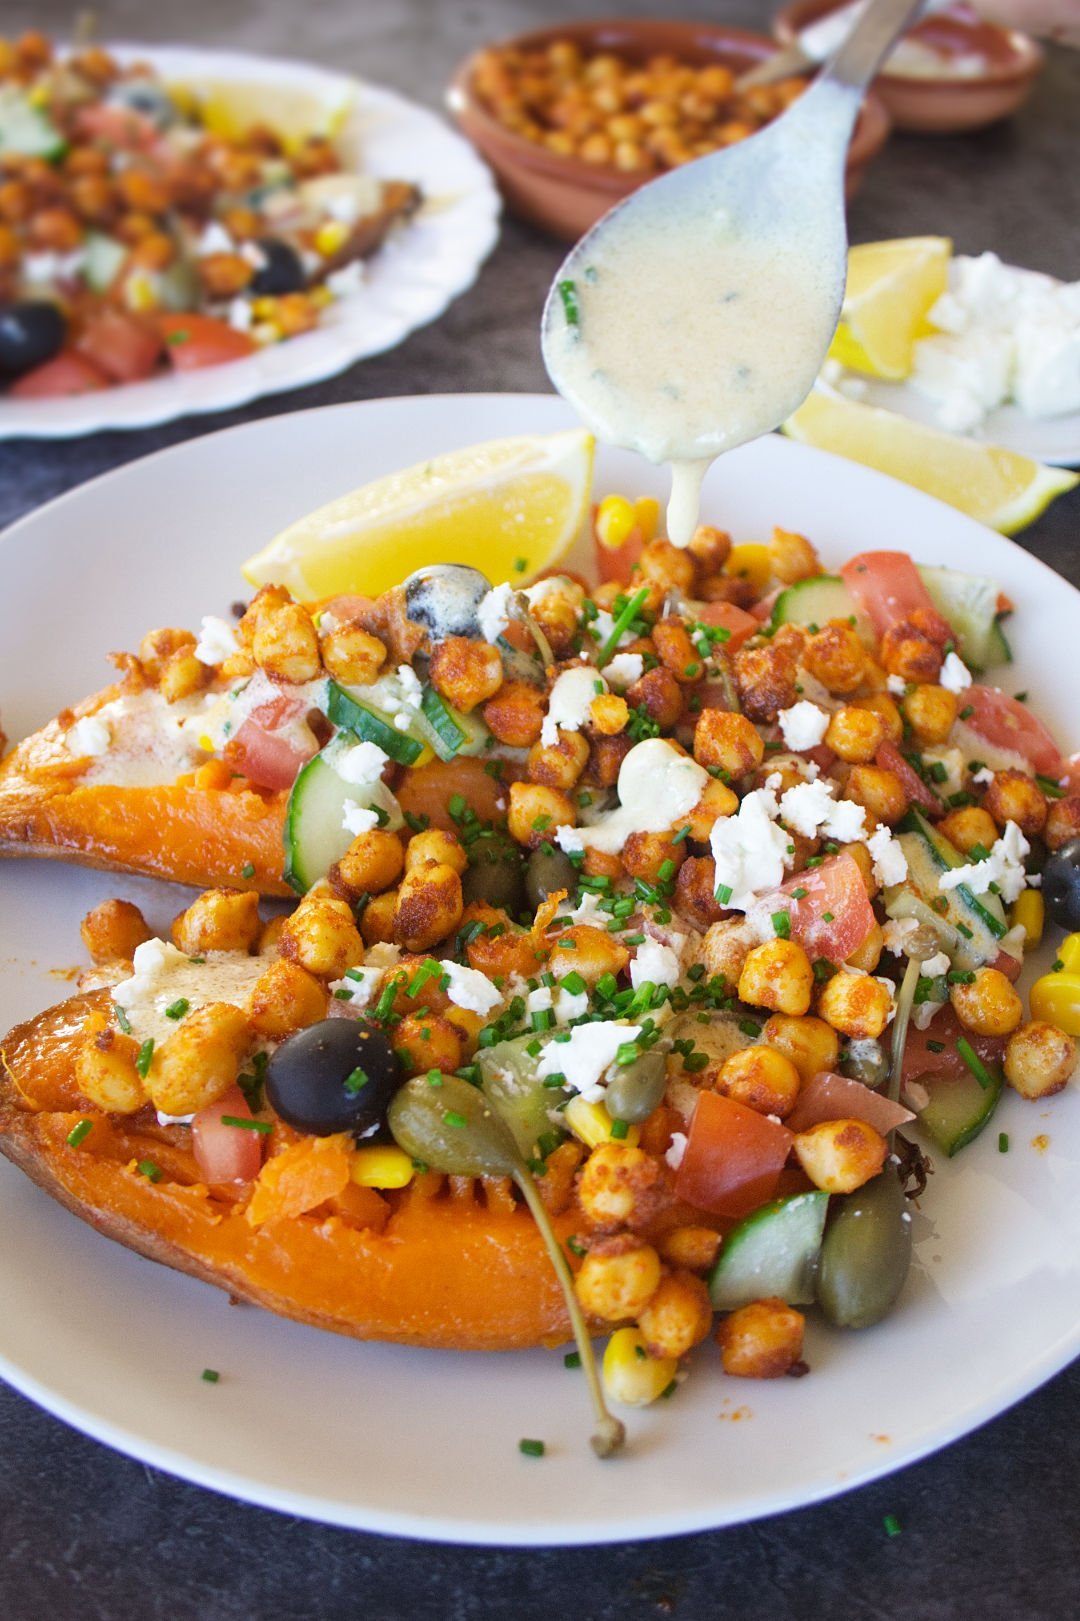 a large baked sweet potato sits on a white plate with plenty of Mediterranean inspired toppings.